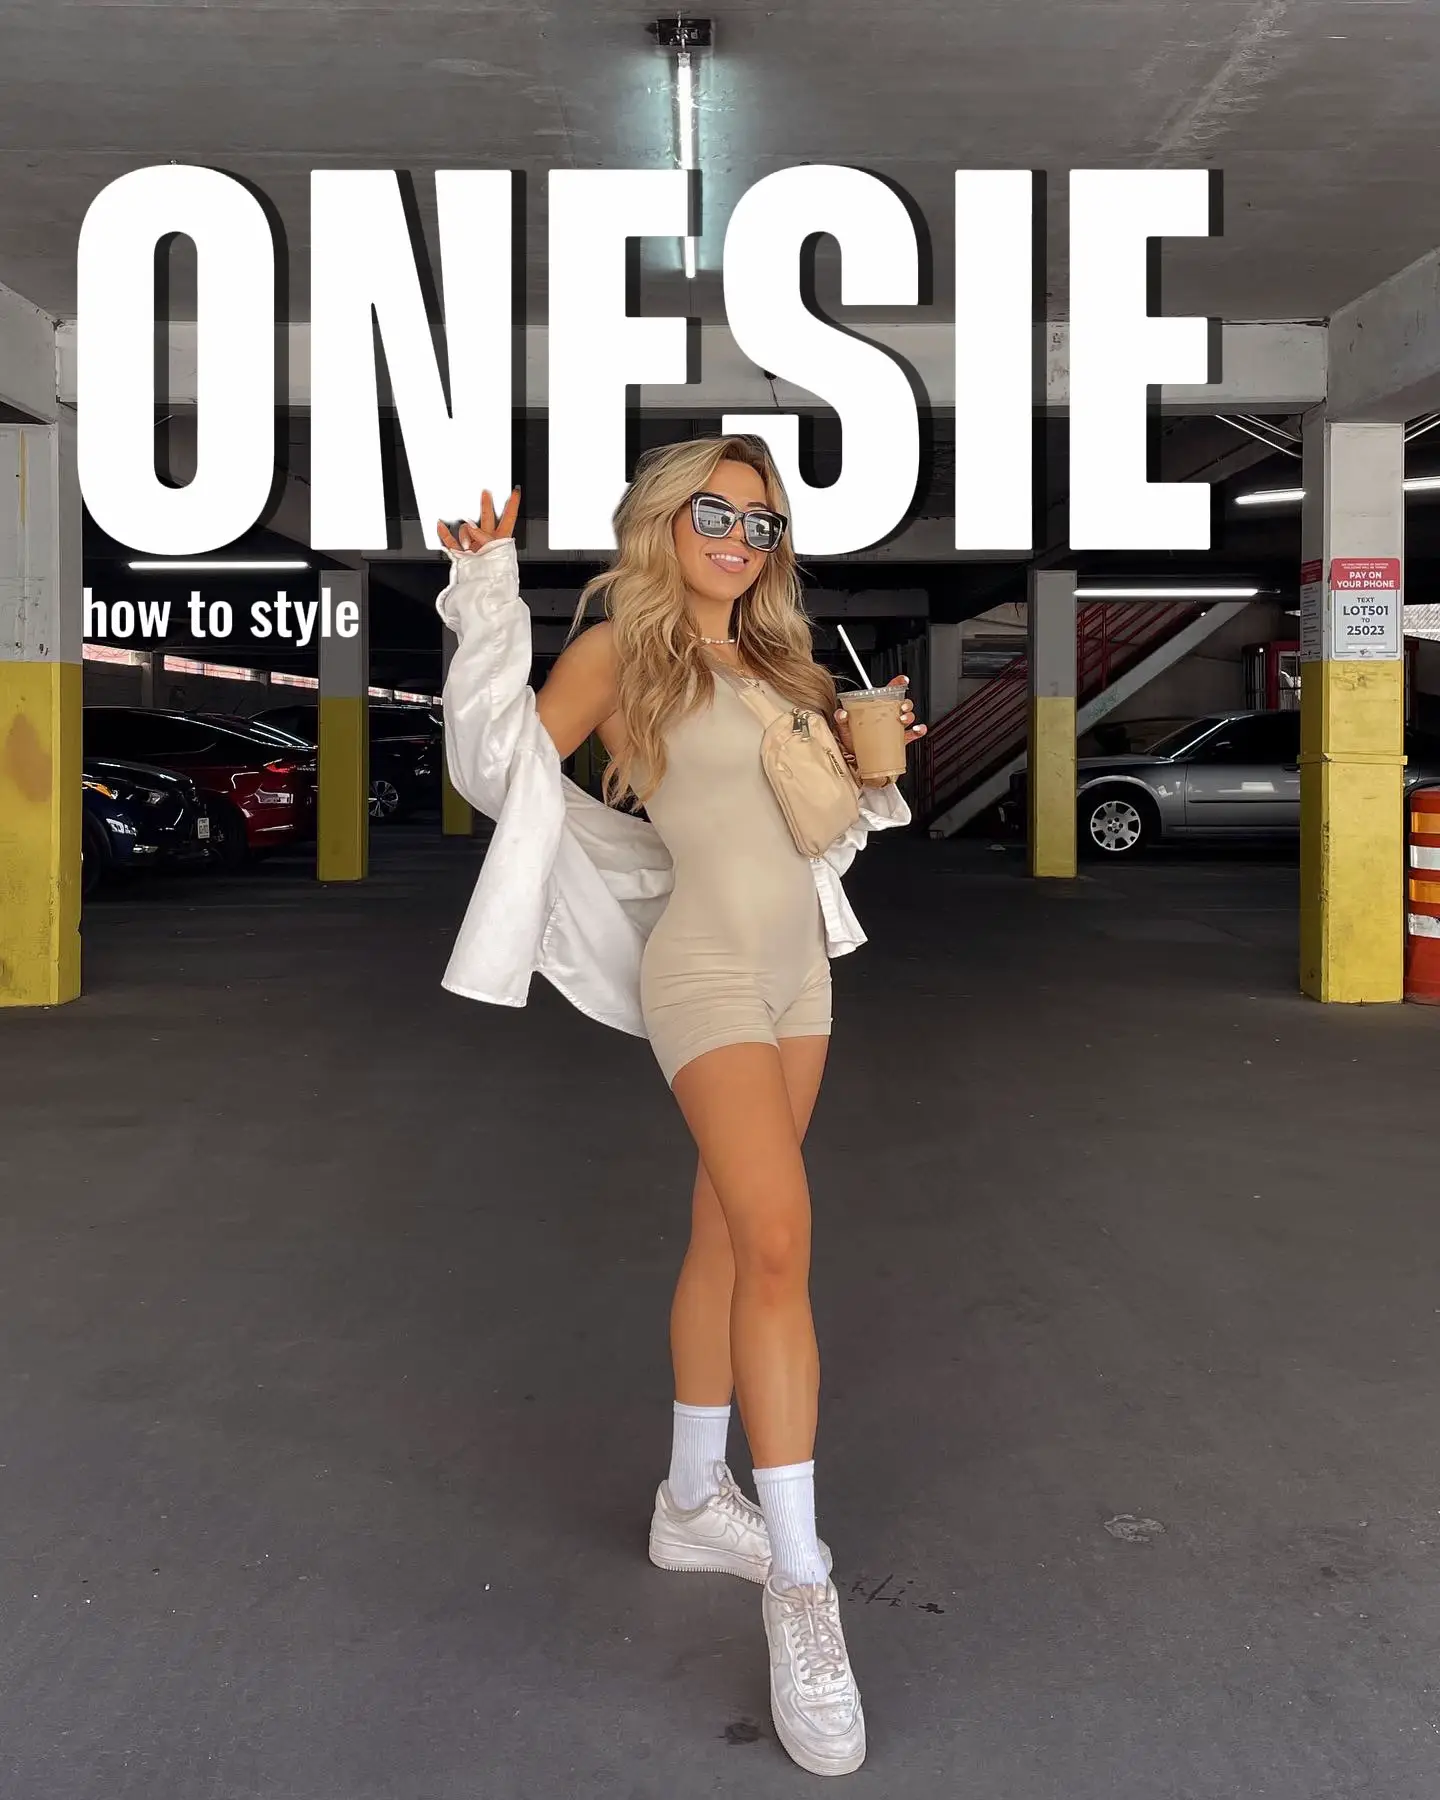 How to Style a Onesie, Gallery posted by Elia Esparza